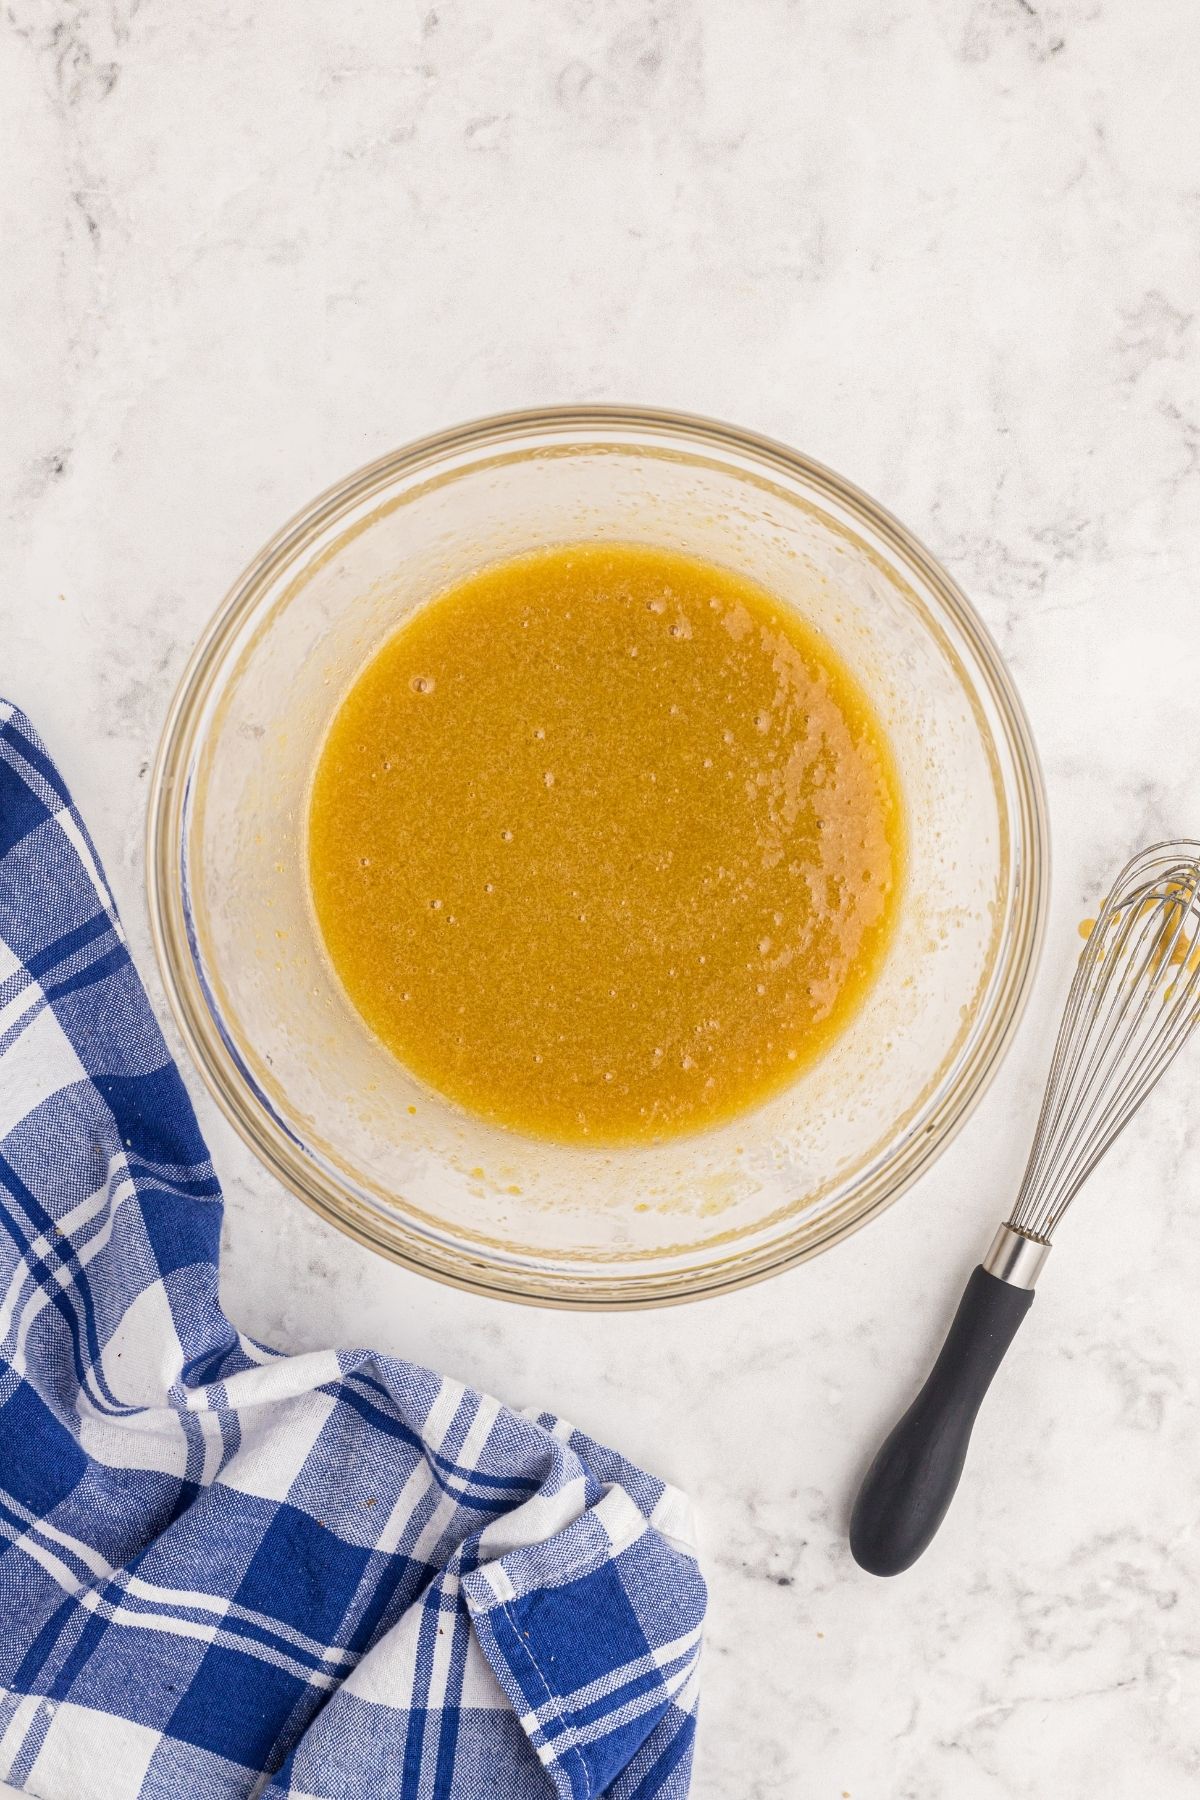 Orange juice, oil and other cake ingredients mixed together in a clear bowl